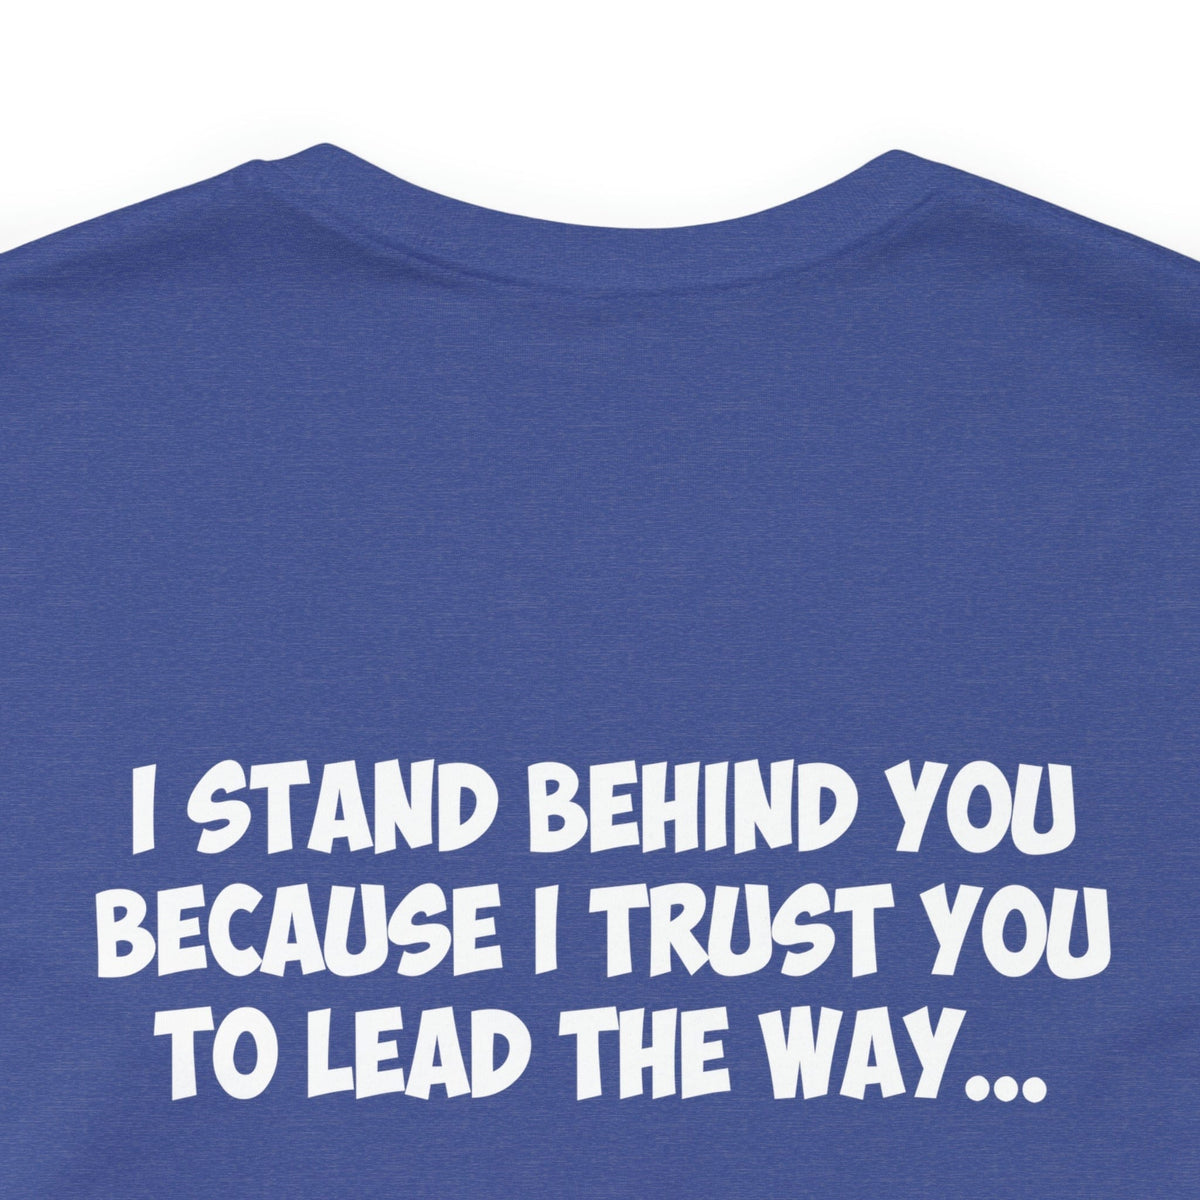 I Stand Behind You Because I Trust You To Lead The Way...